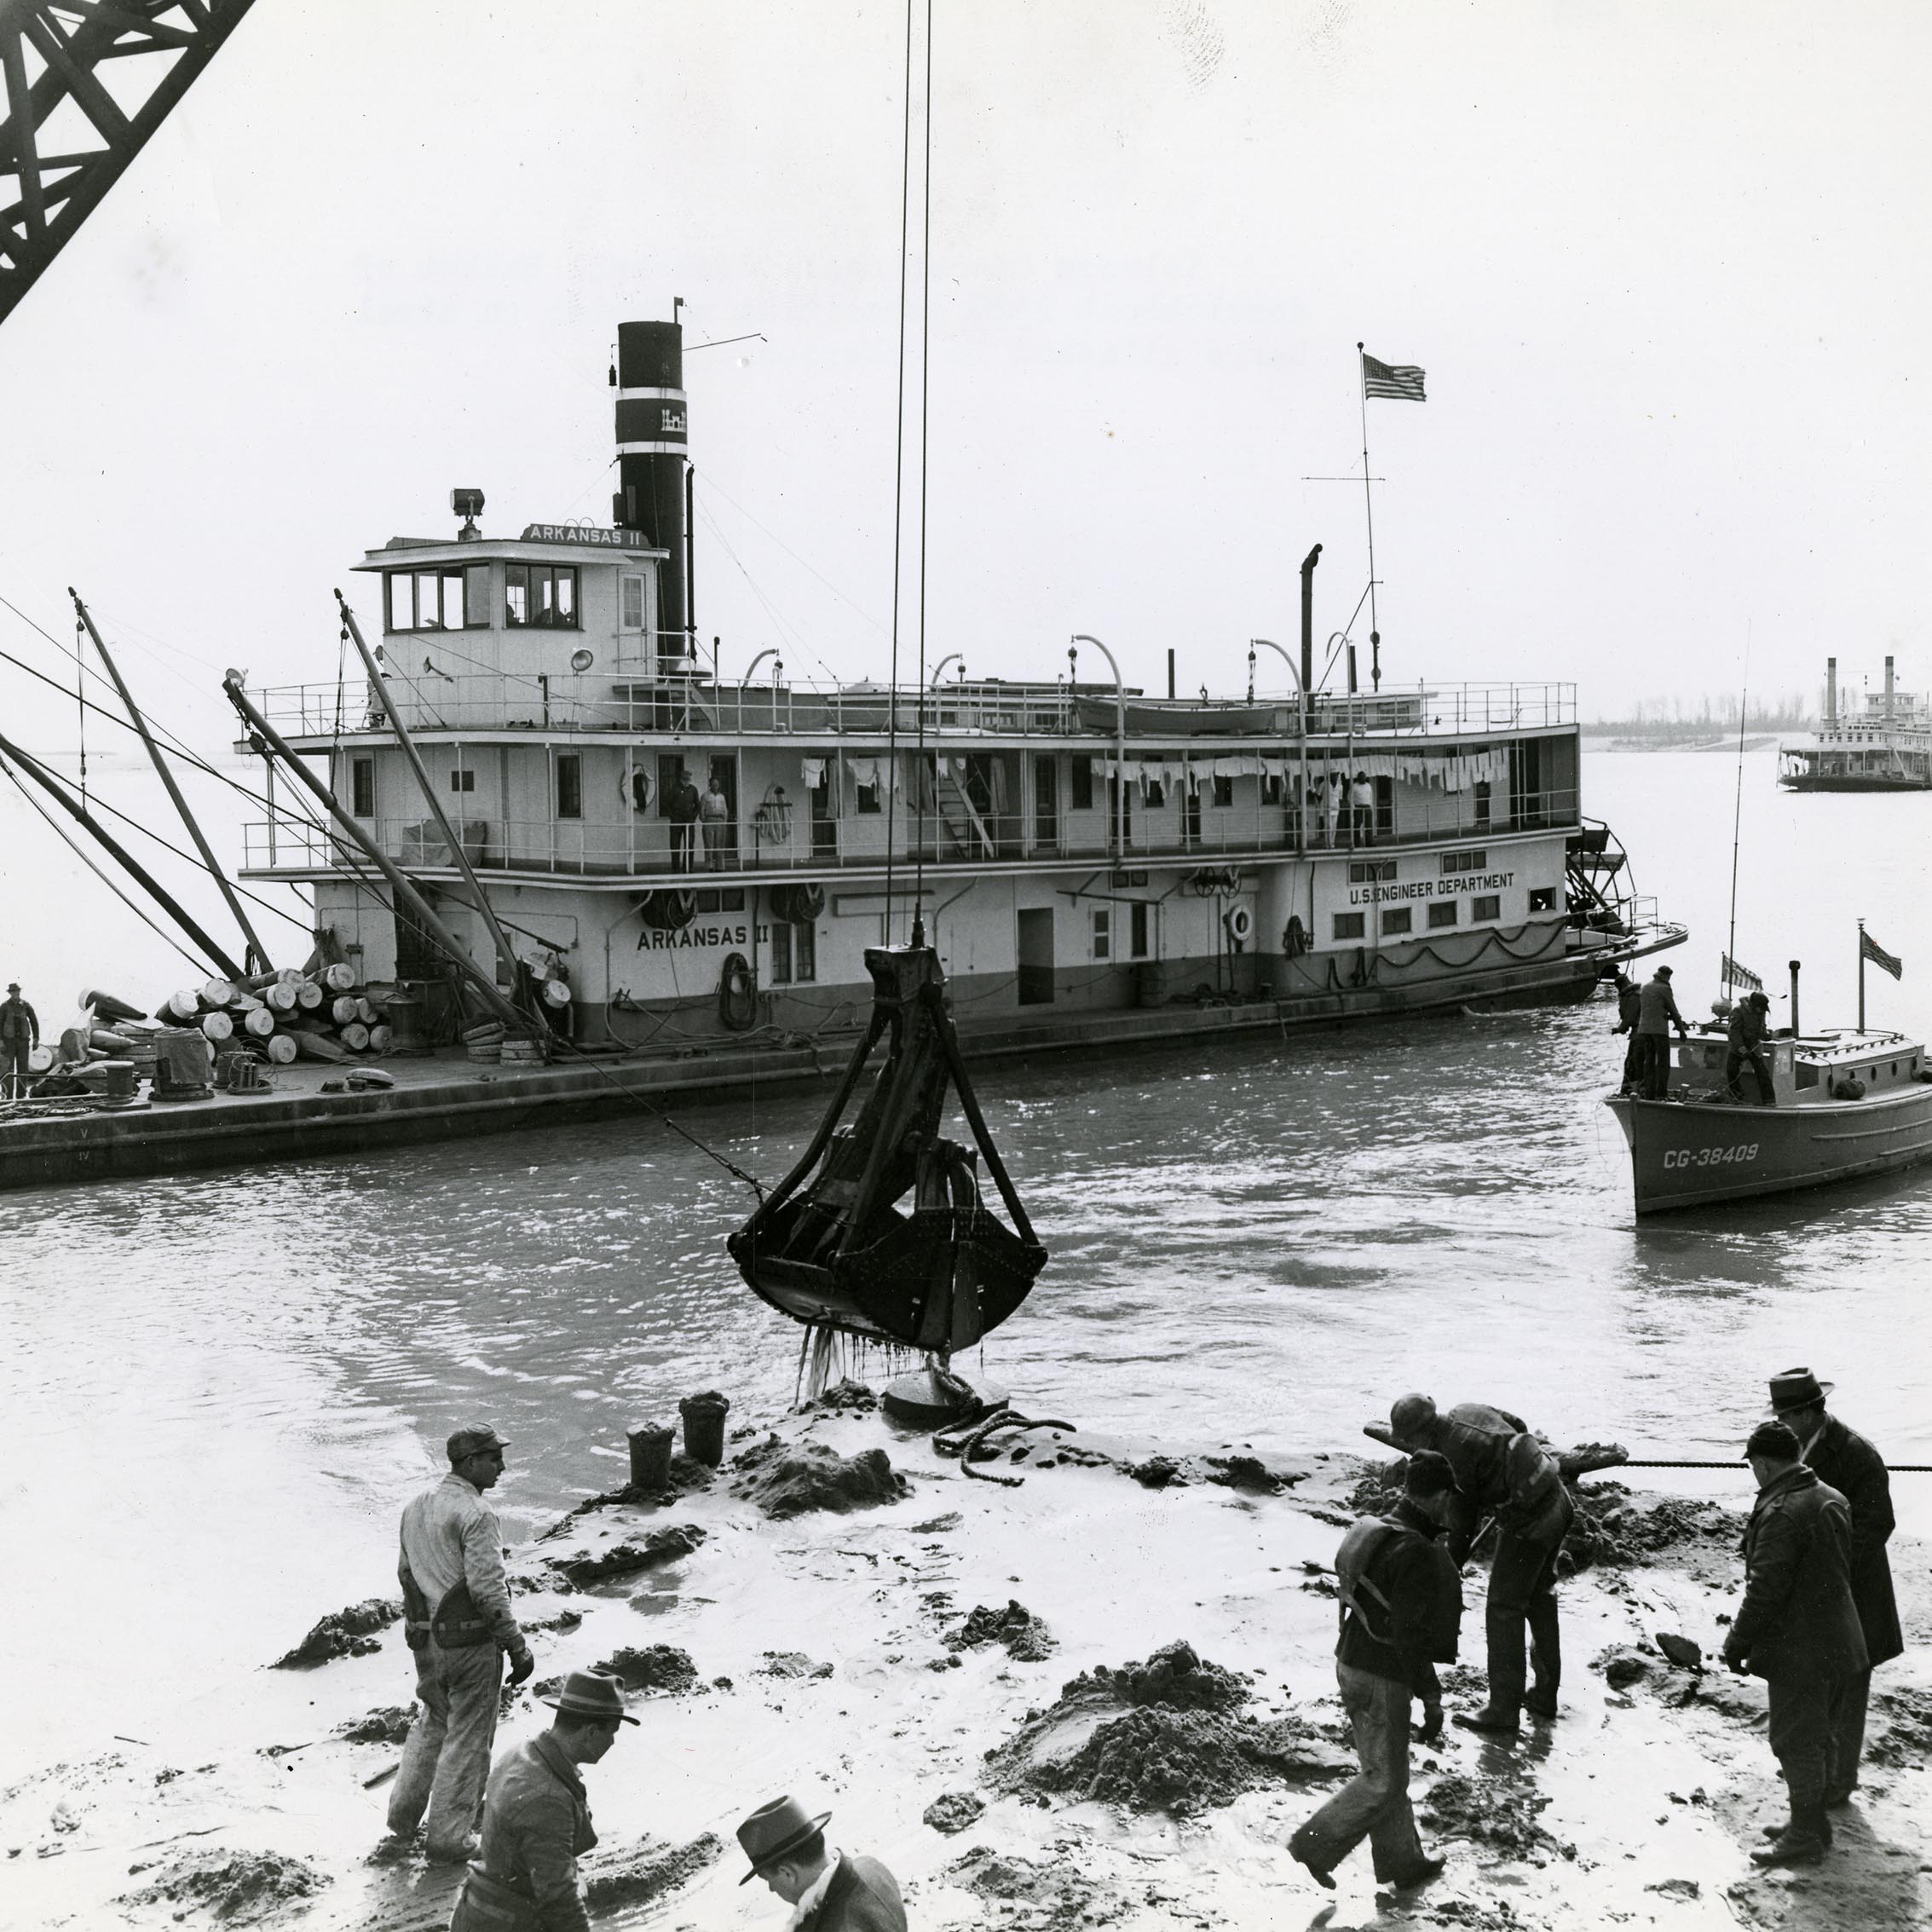 Large boat with crane deposits wreckage onto a barge